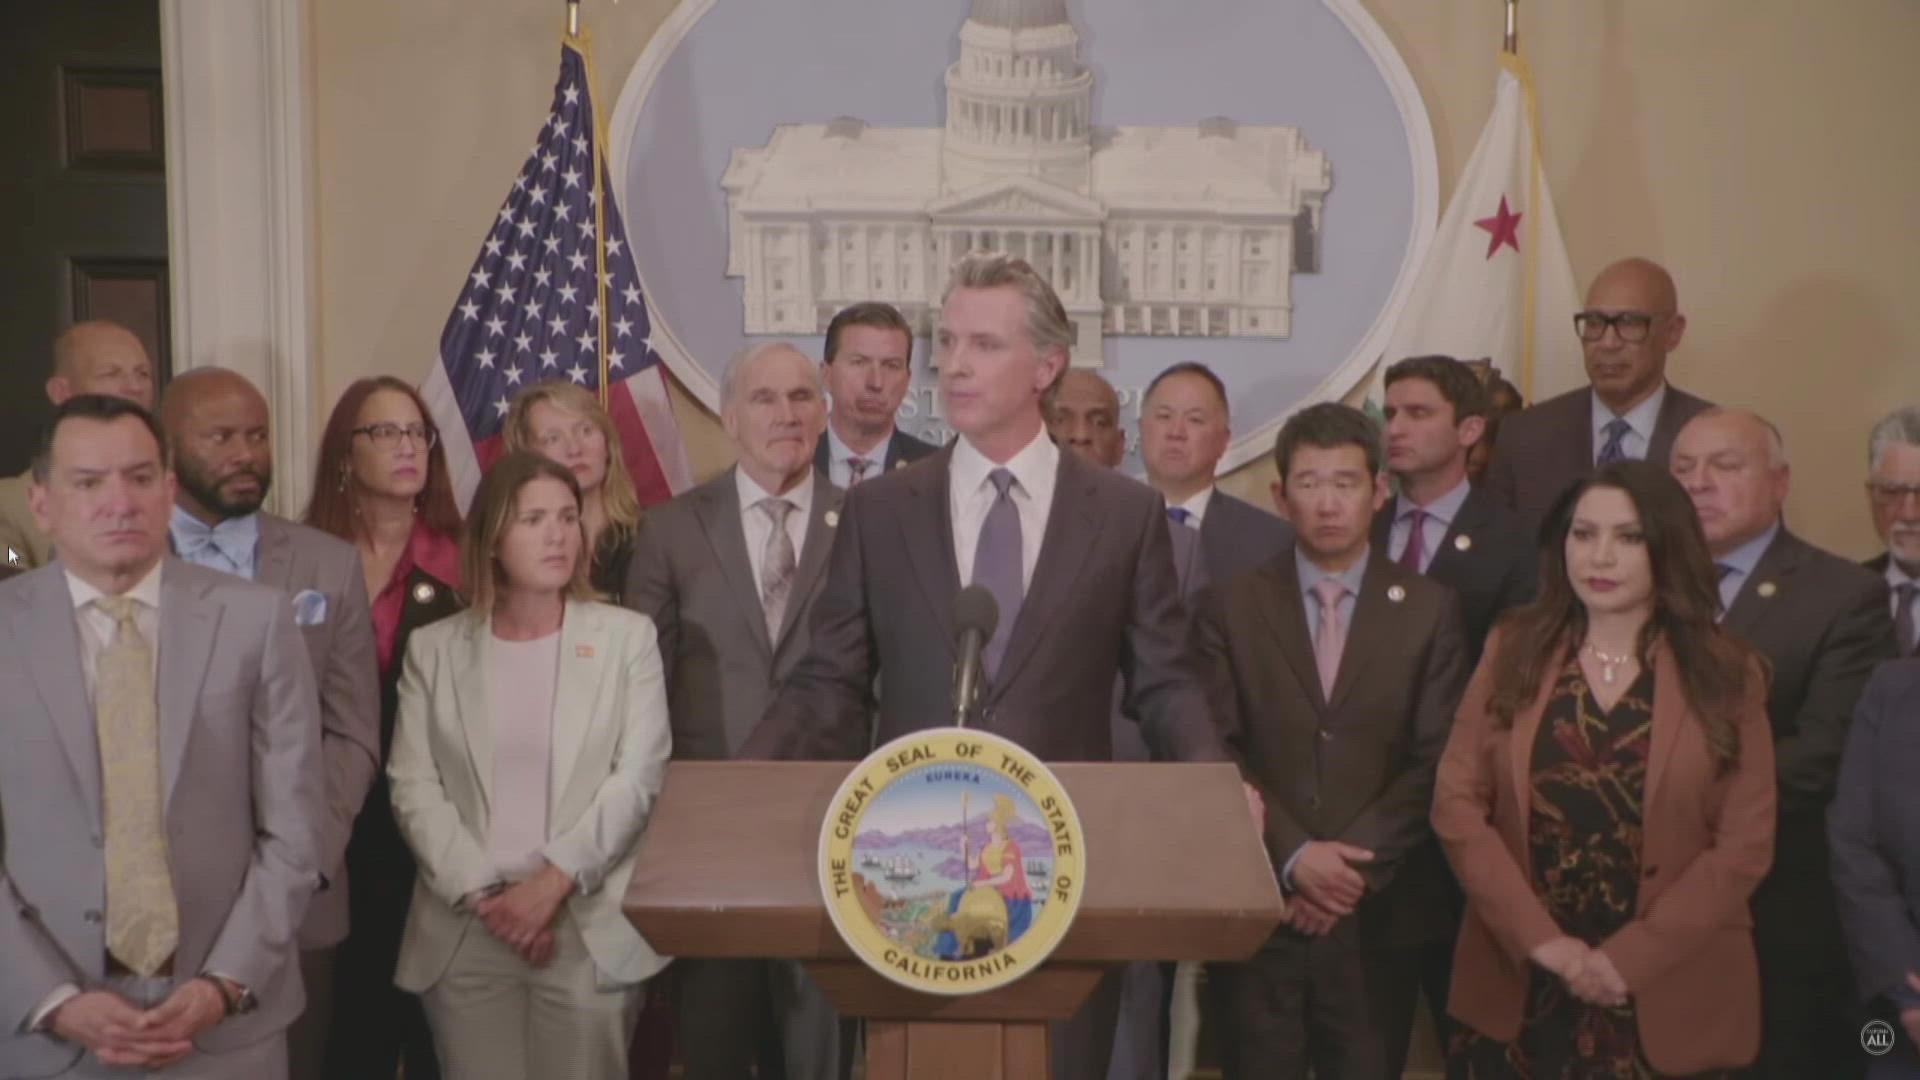 California Governor Gavin Newsom, along with members of the California Legislature, are addressing ways the state can curb gun control.